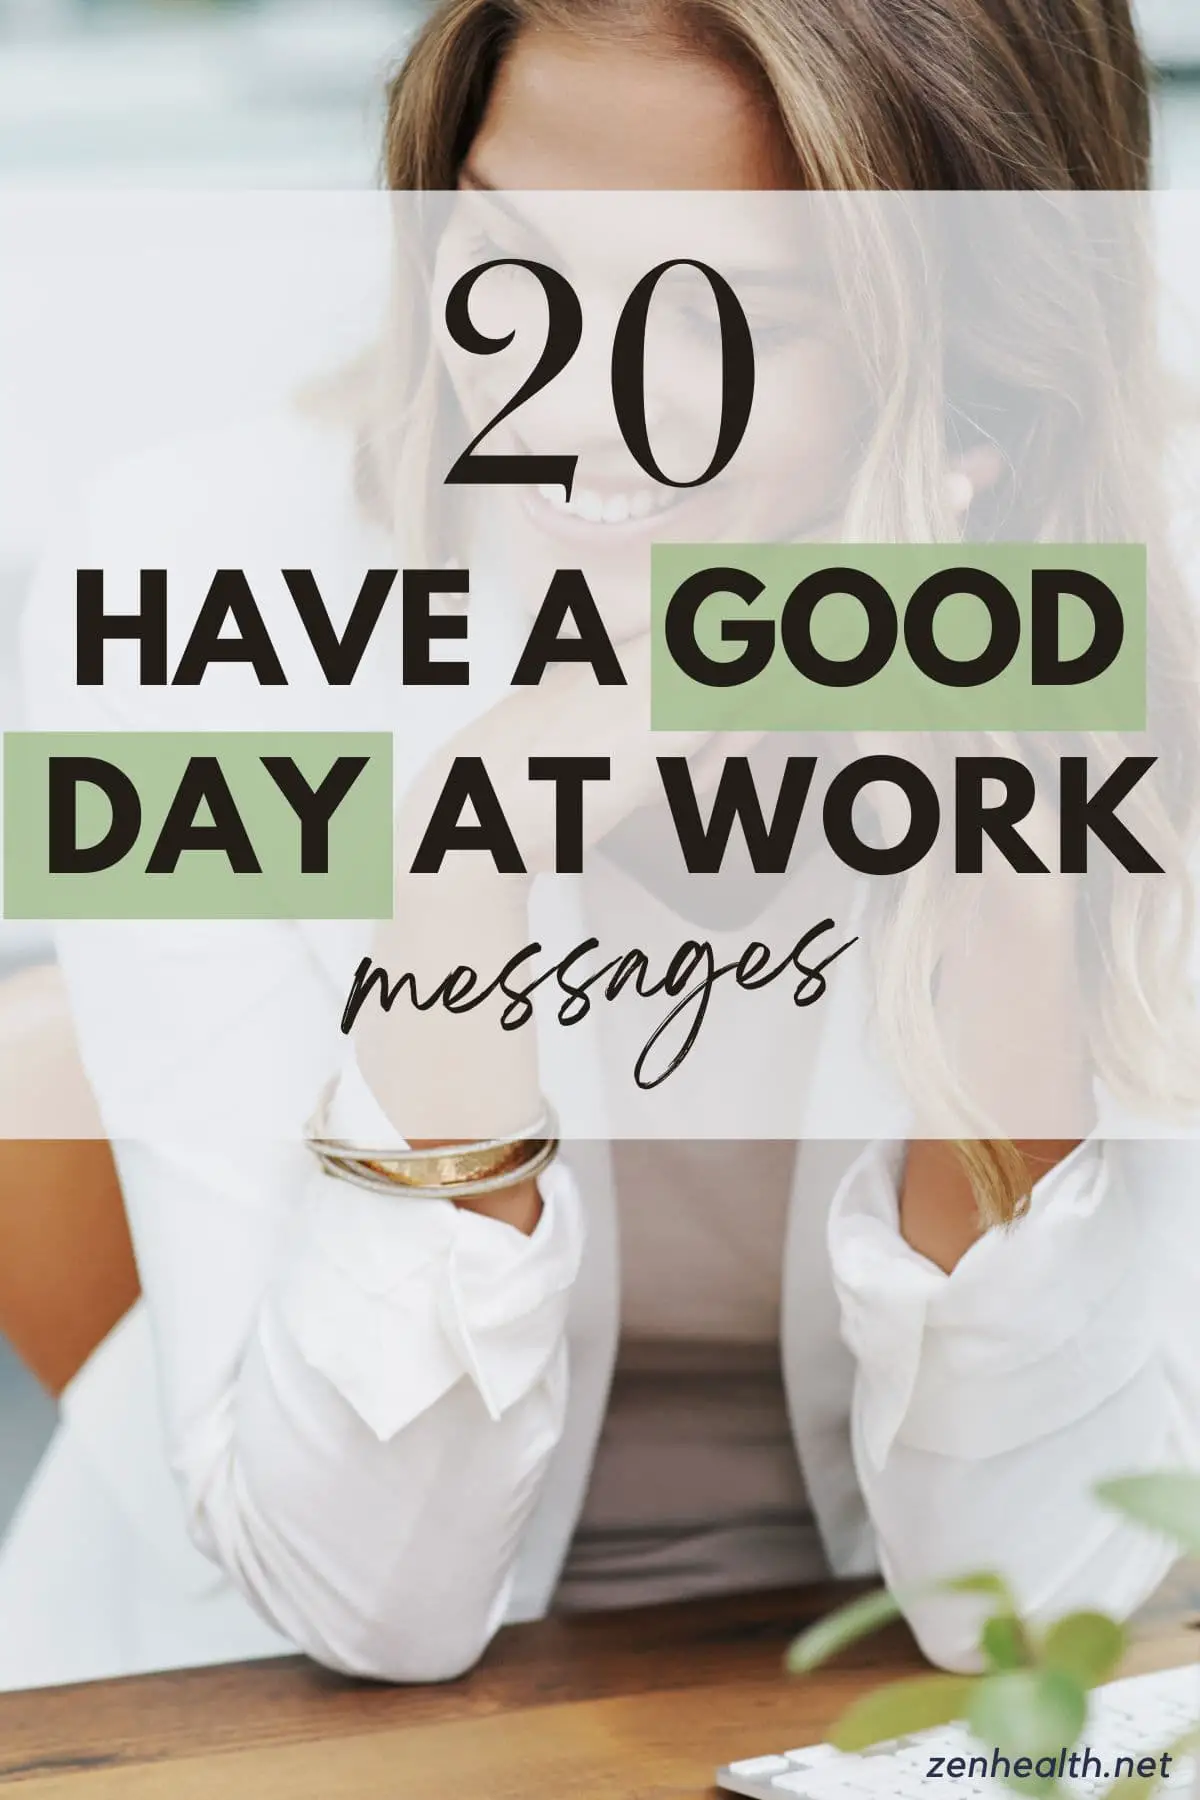 20 have a good day at work messages text overlay on an image of a woman smiling while at the office